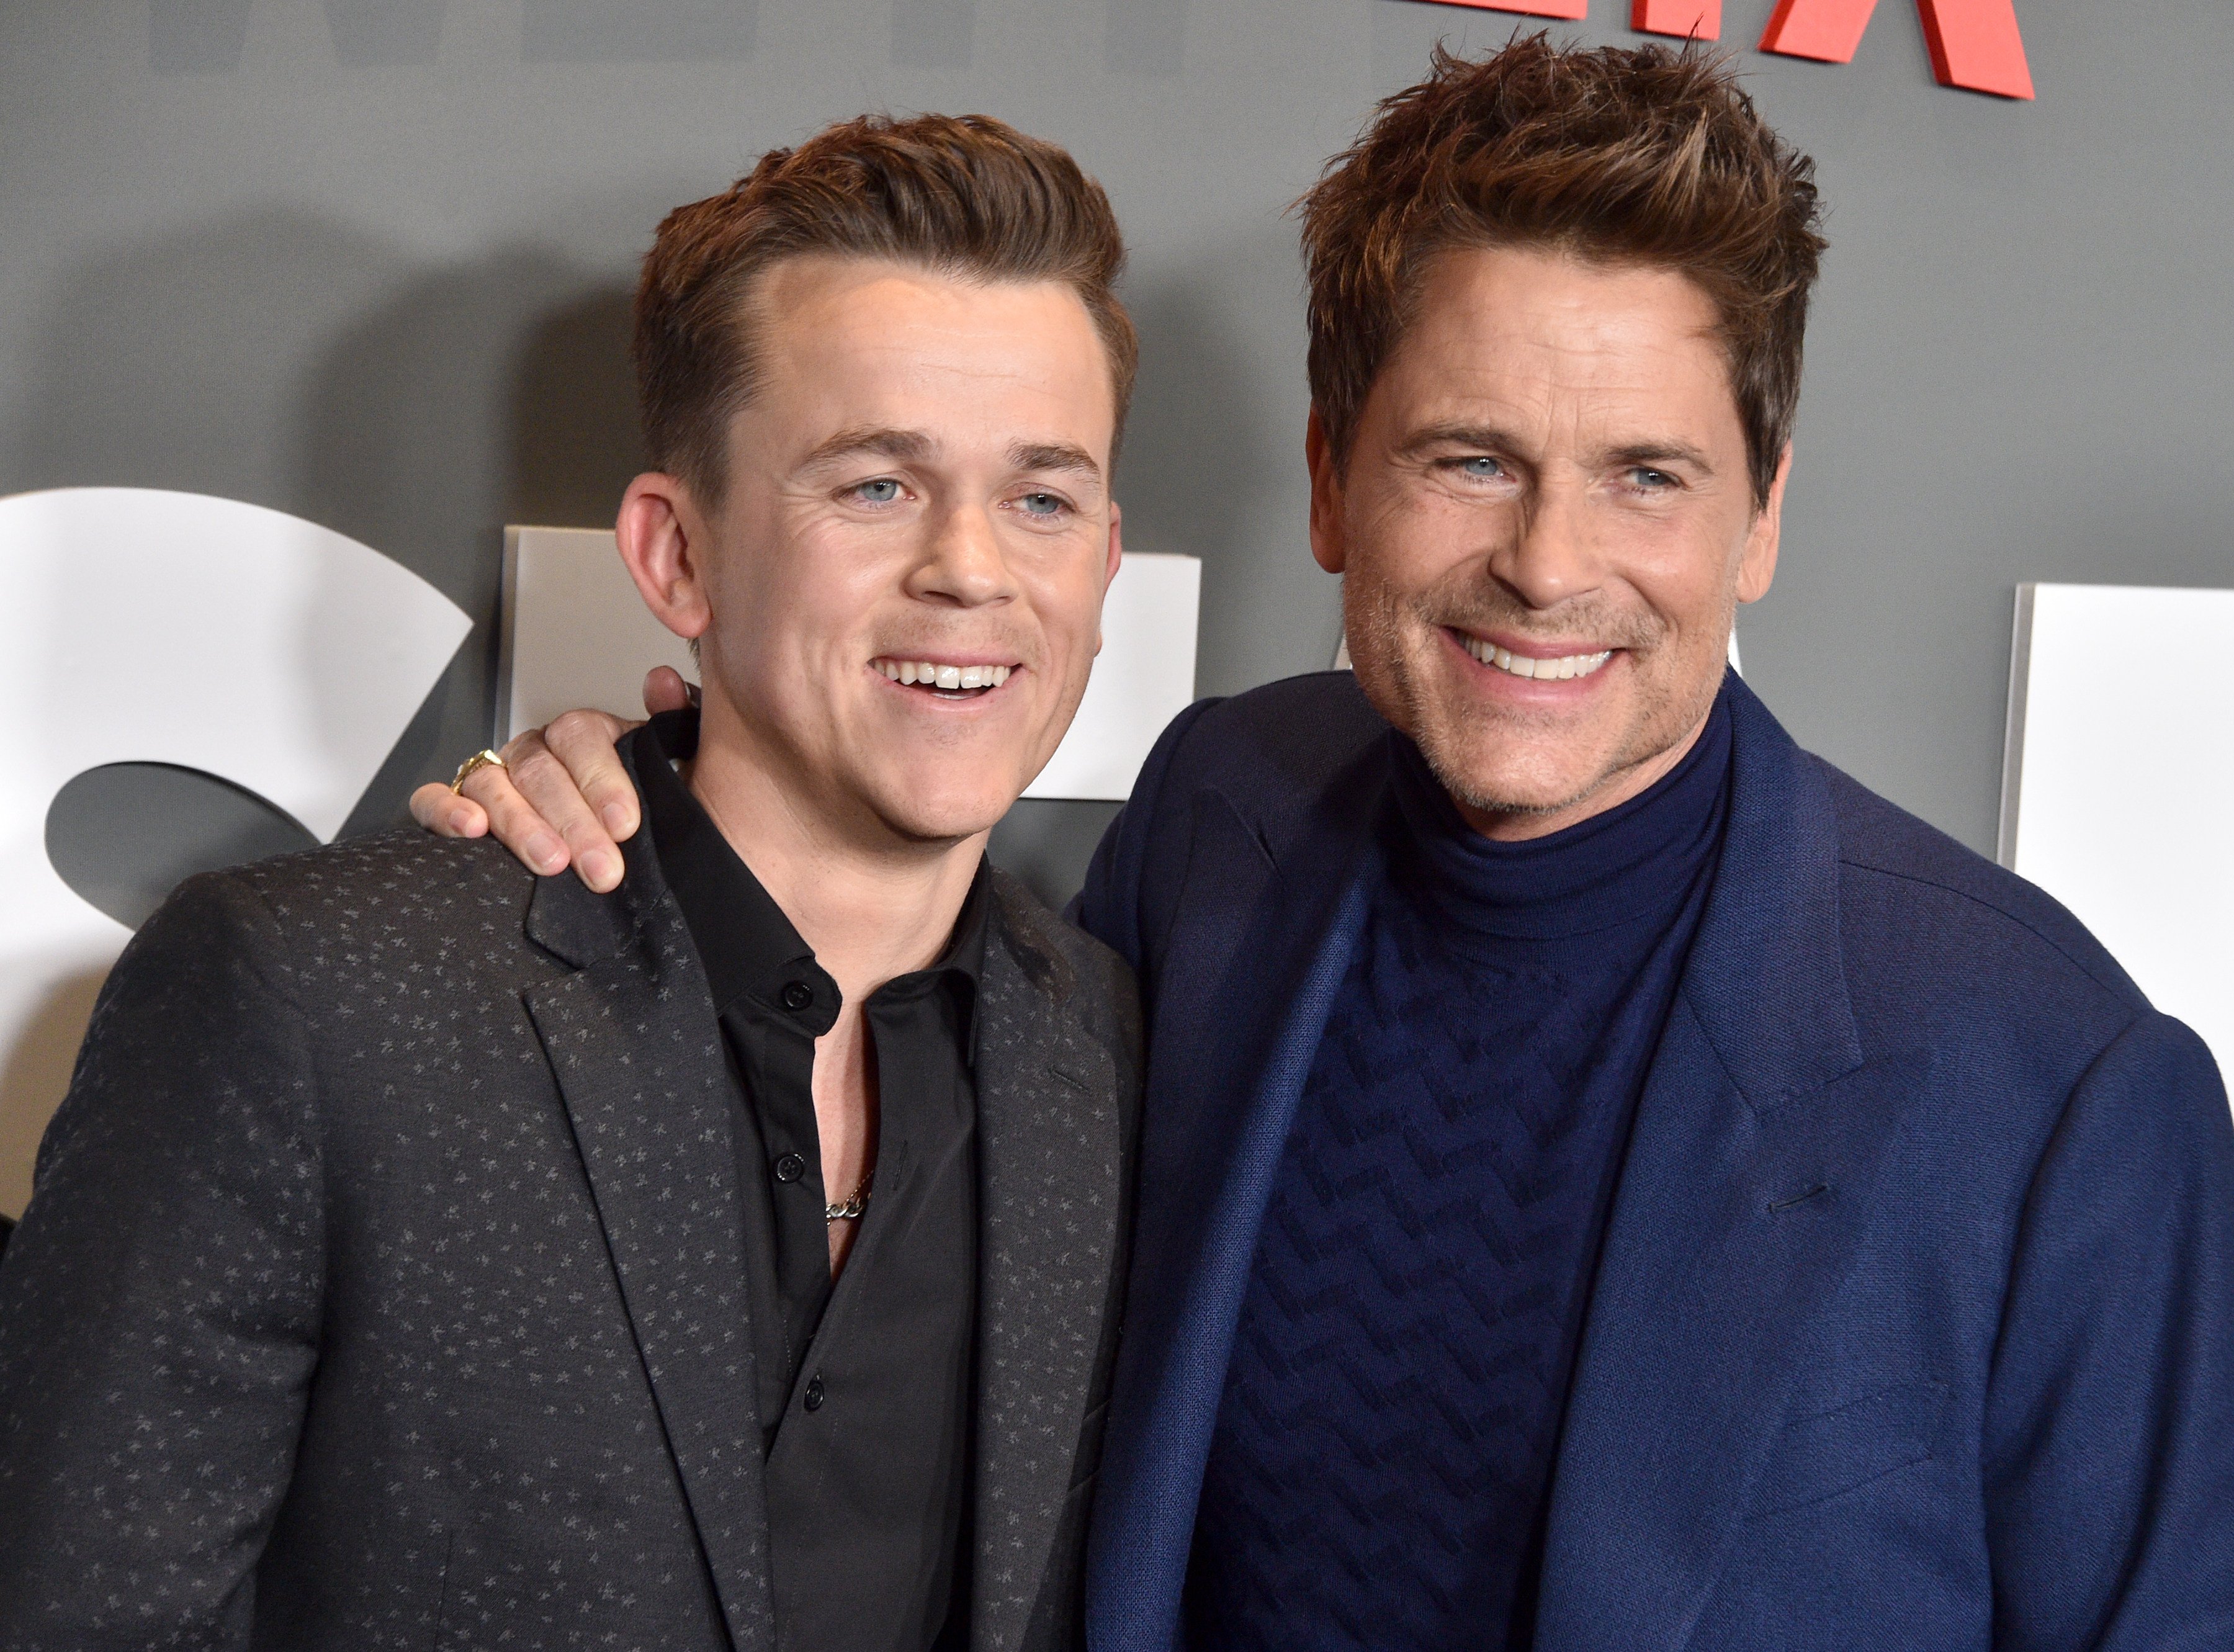 Who is the younger son of Parks and Rec actor Rob Lowe, and is he dating Lucy Hale? Photo: Getty Images